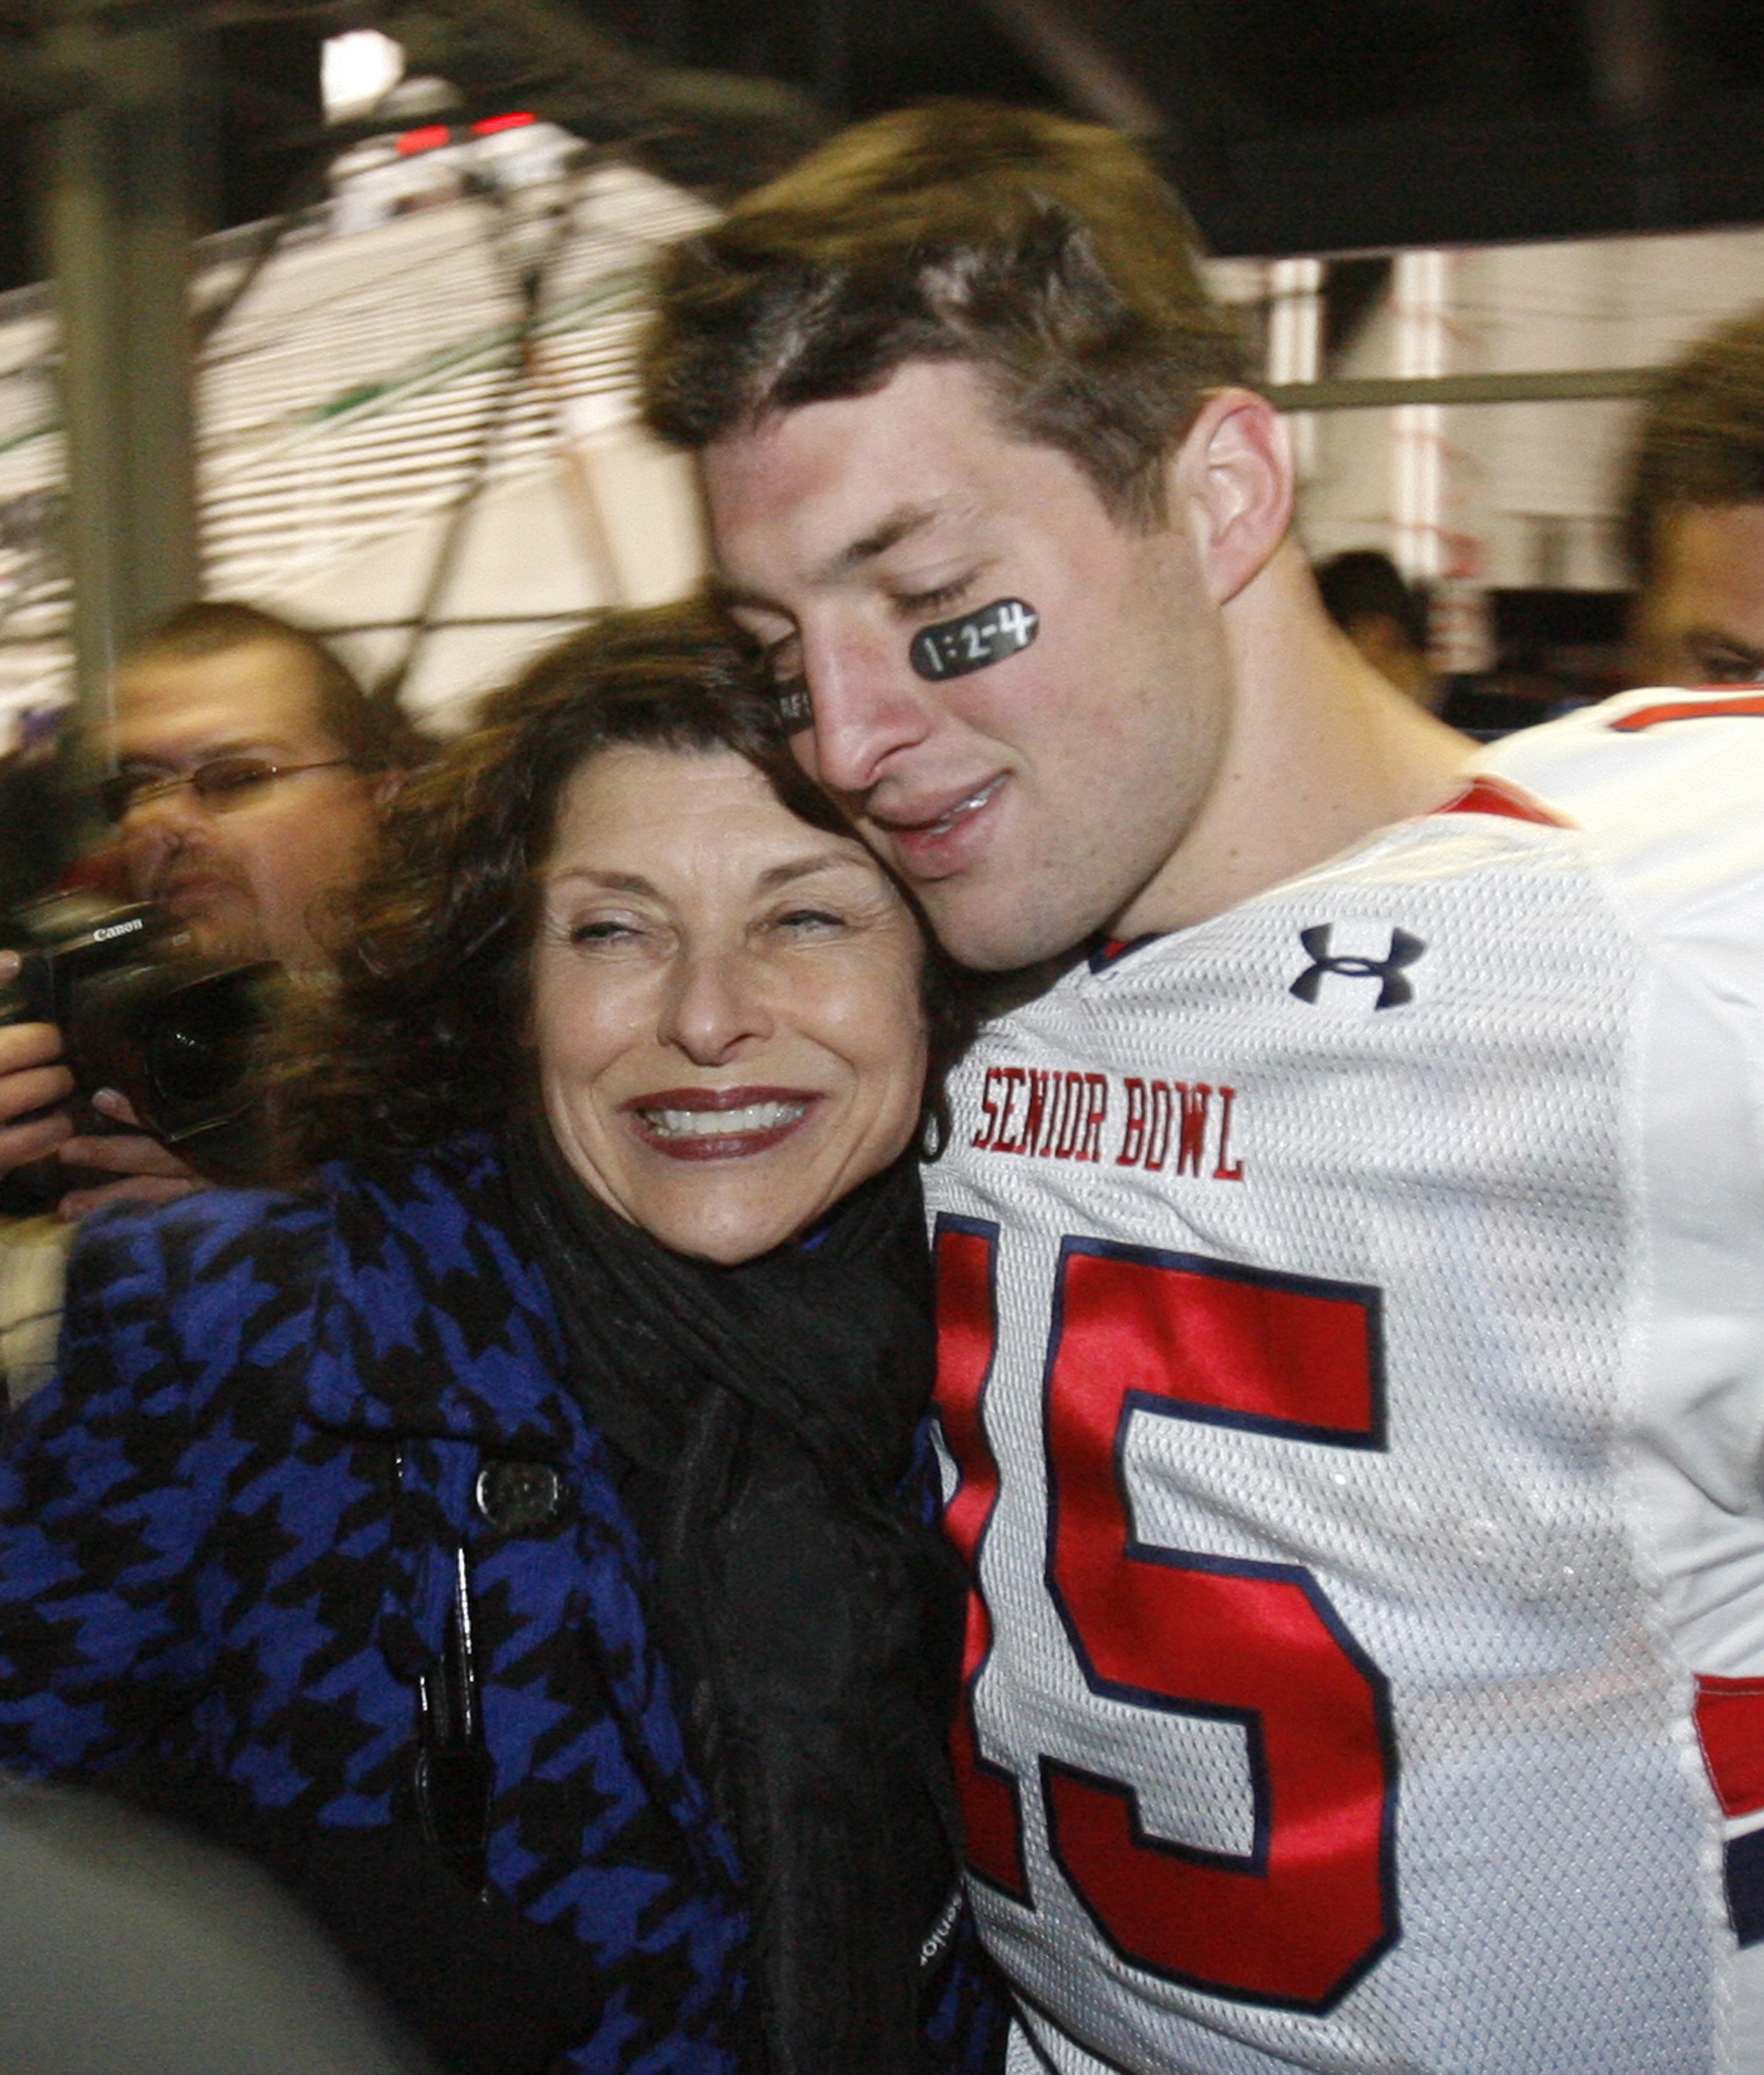 Former Florida quarterback Tim Tebow hugs his mother, Pam, following the Senior Bowl at Ladd-Peebles Stadium in Mobile, Alabama, Saturday, January 30, 2010. The North beat the South, 31-13. | Source: Getty Images